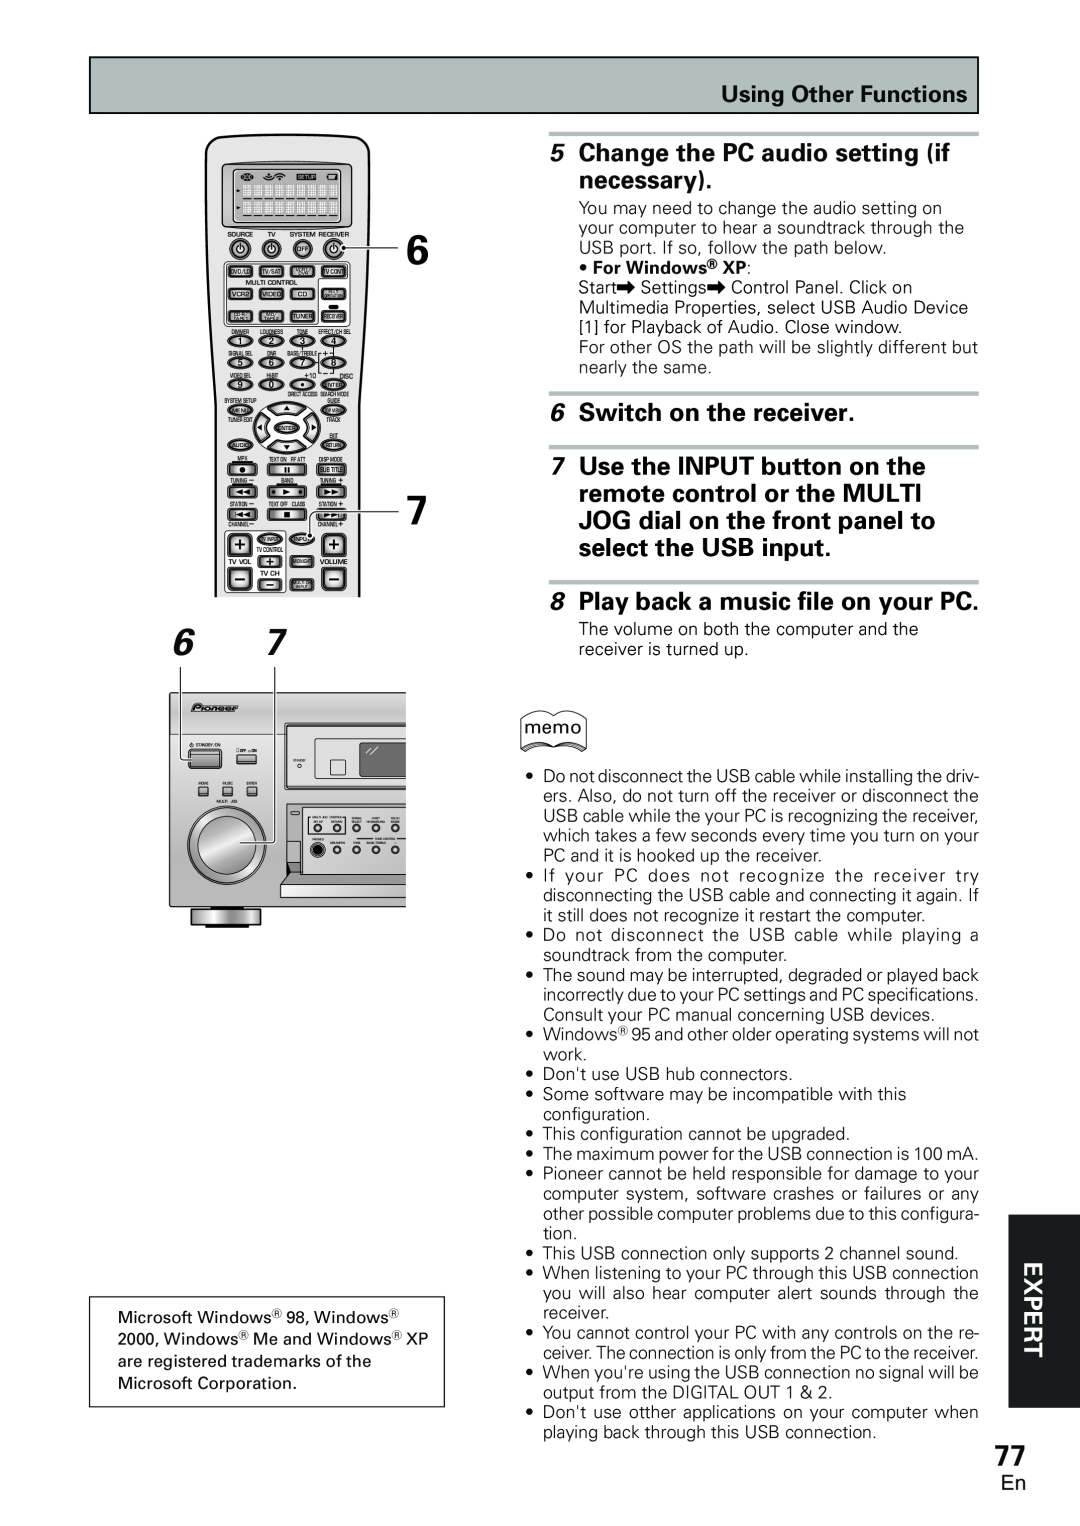 Pioneer VSX-D2011-S Change the PC audio setting if, necessary, Switch on the receiver, Use the INPUT button on the, Expert 